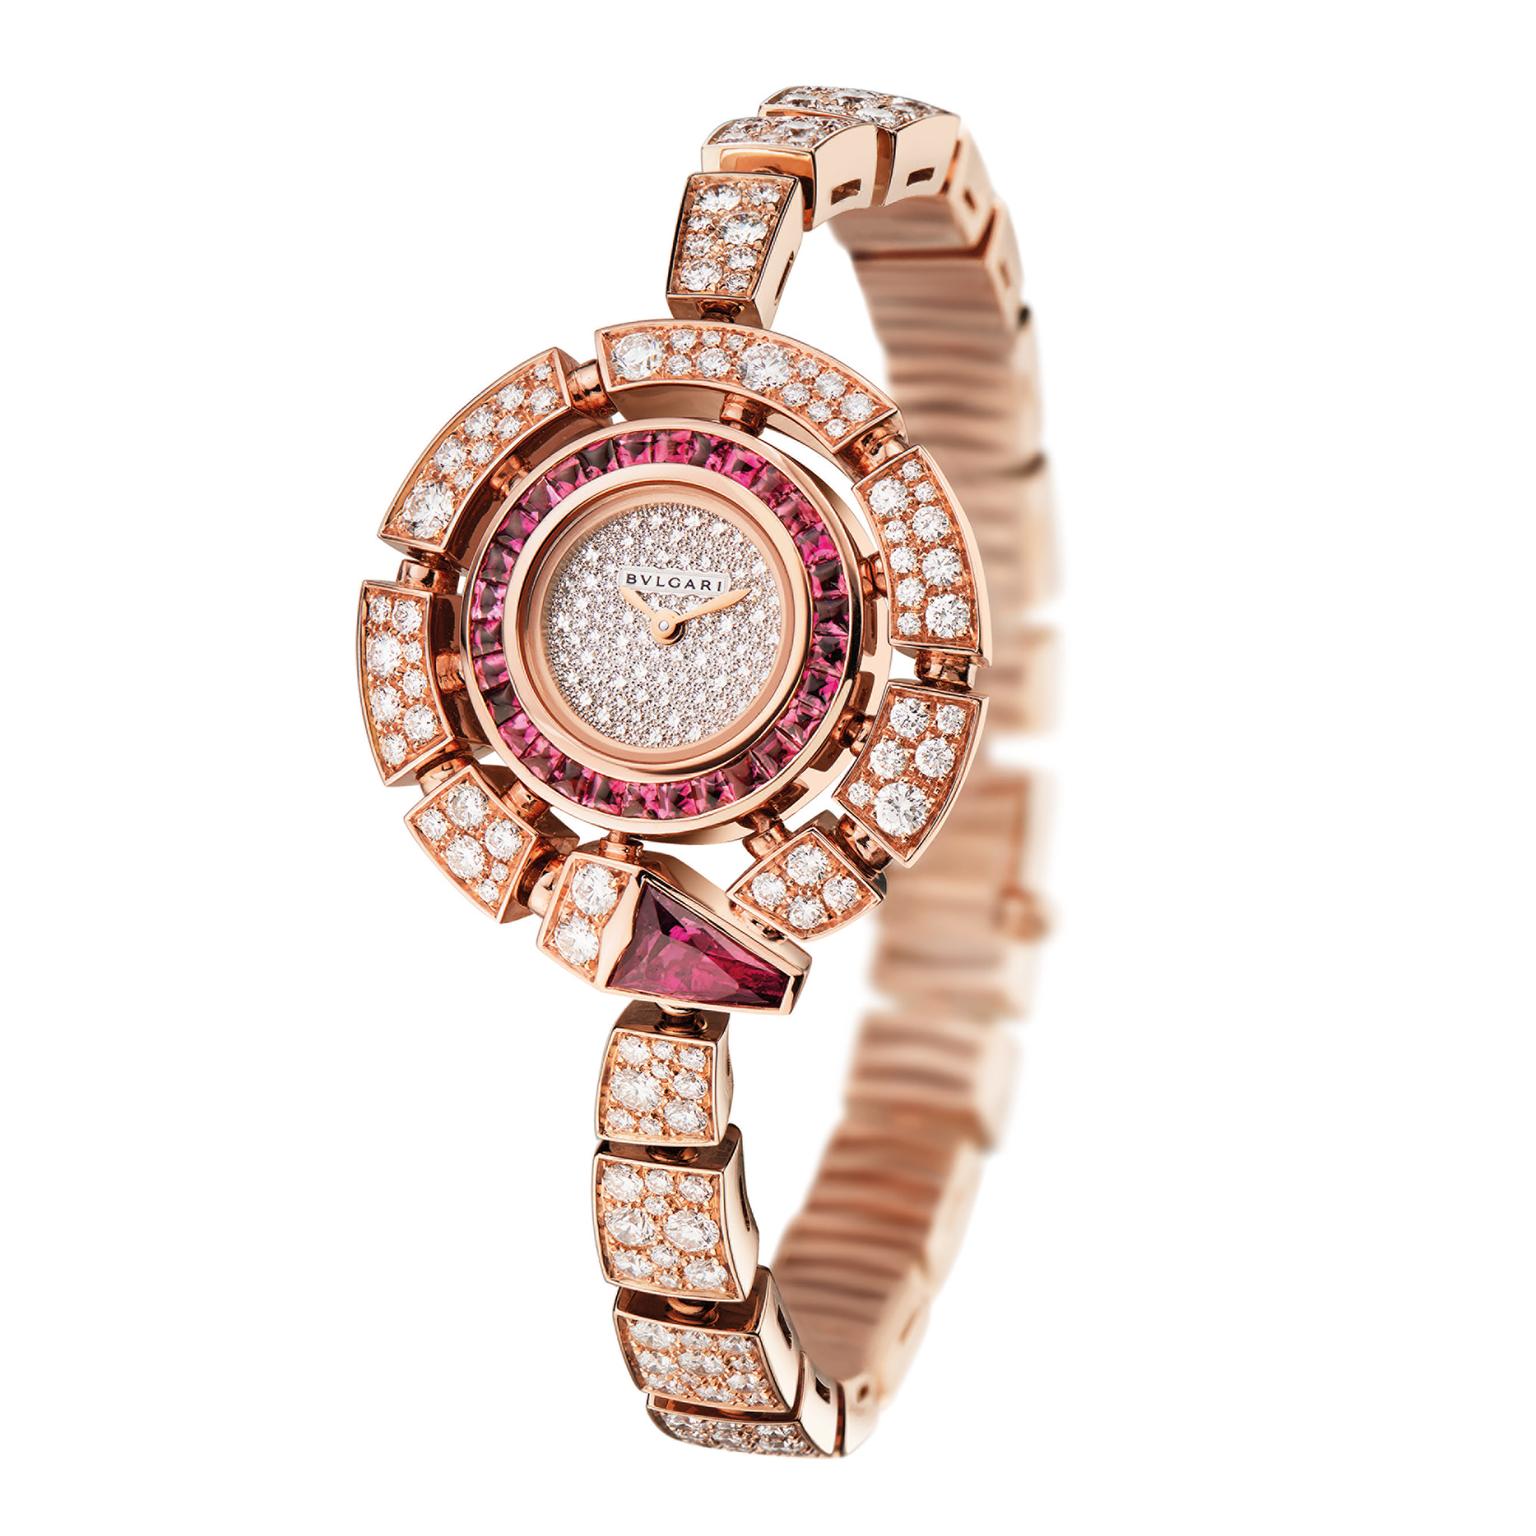 Homegrown Luxury Jewellery brand Rose collaborates with Bulgari to present  a limited-edition collection of the iconic Serpenti timepiece like never  seen before